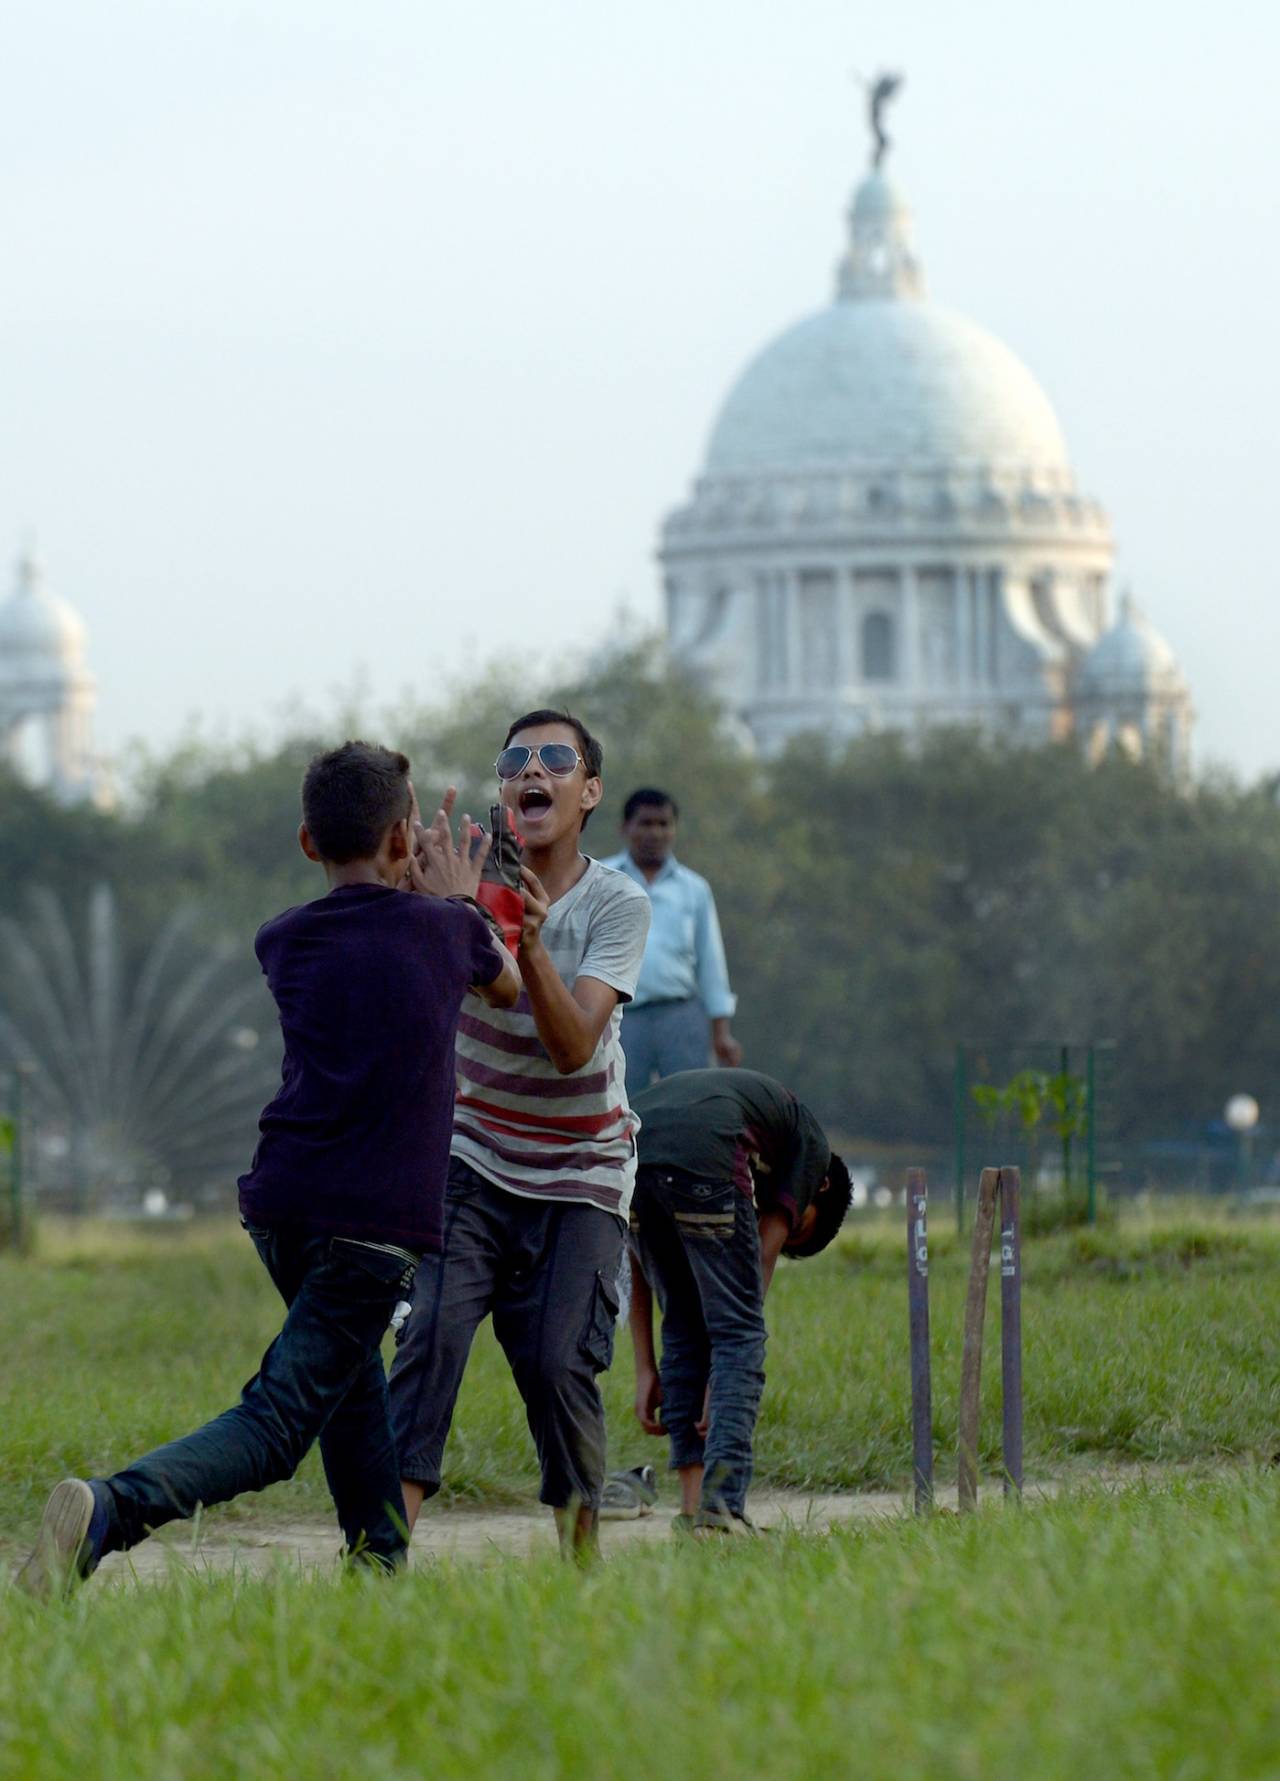 Boys celebrate a wicket at the Maidan as the Victoria Memorial looks on